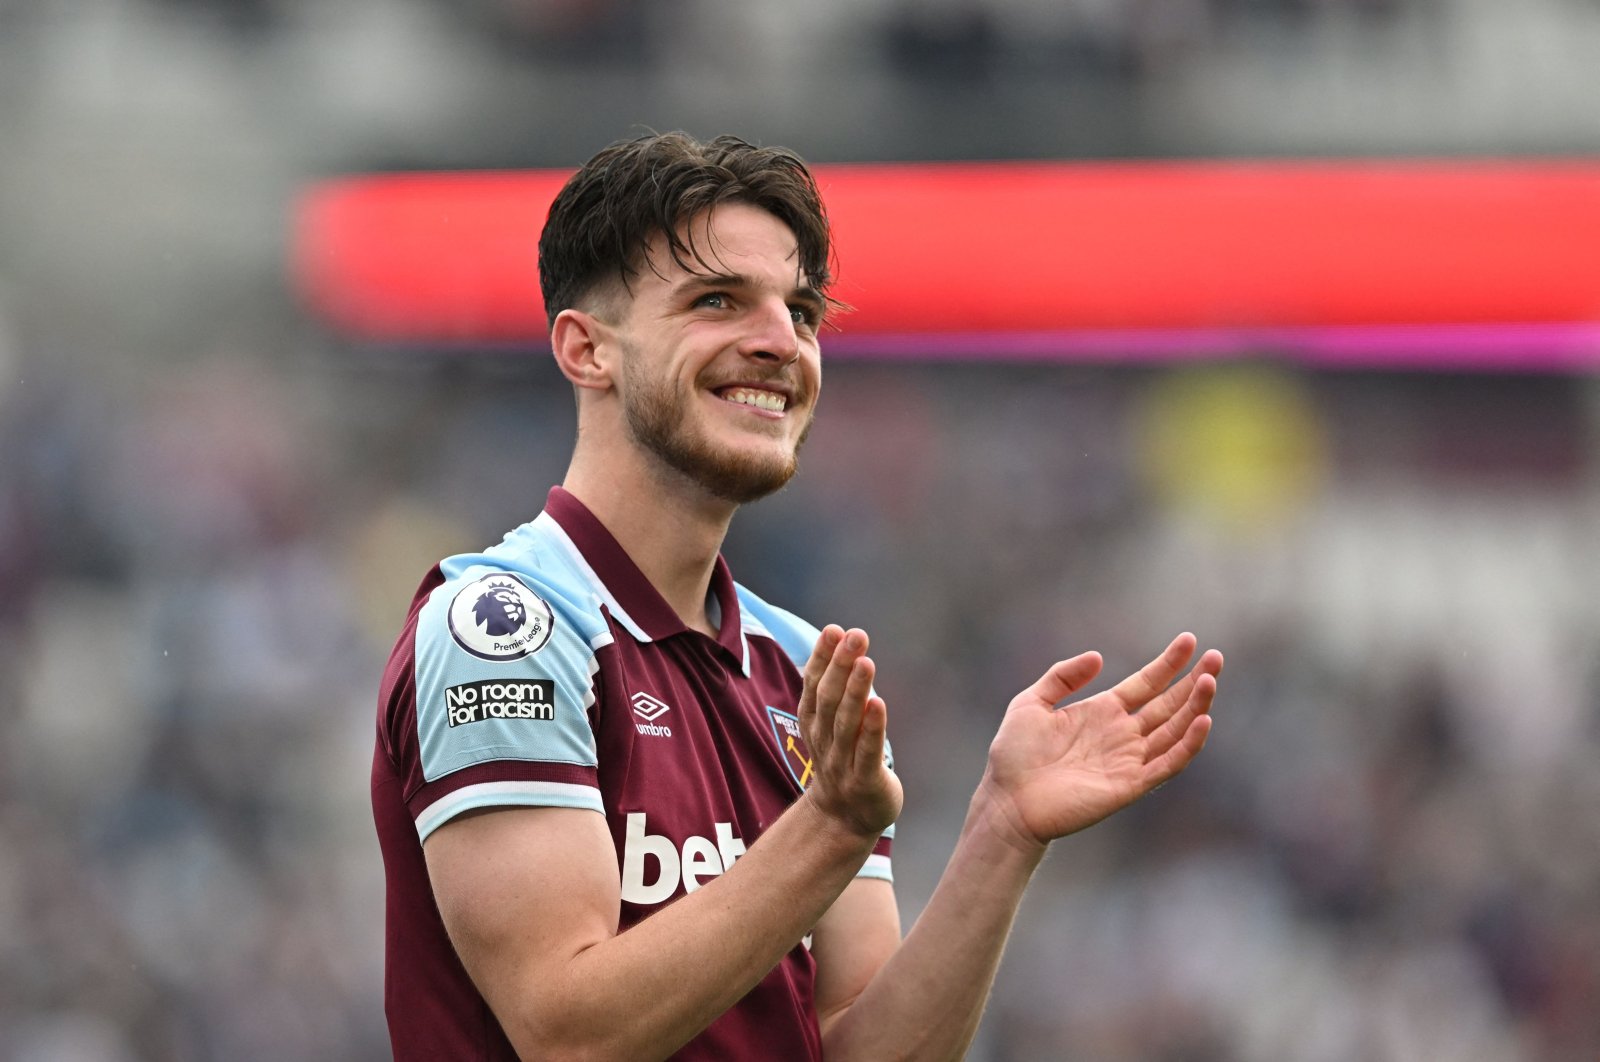 Arsenal signs Declan Rice for British record of $138 million